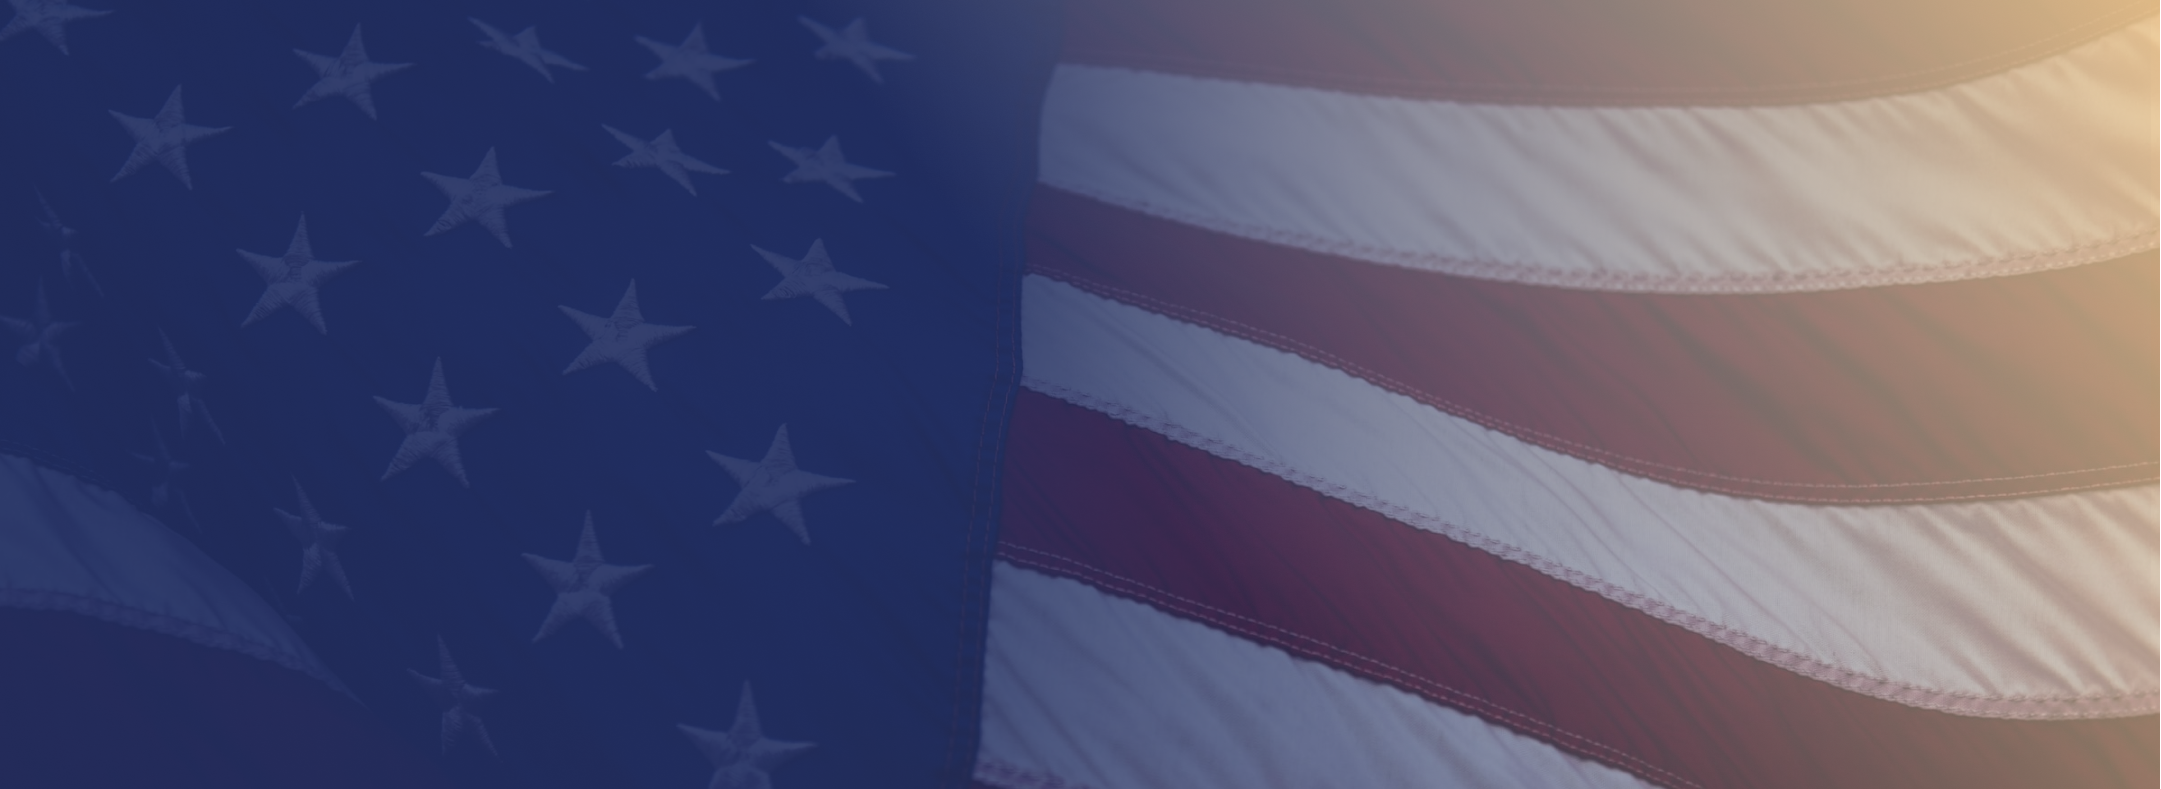 american flag banner with text and logo in foreground